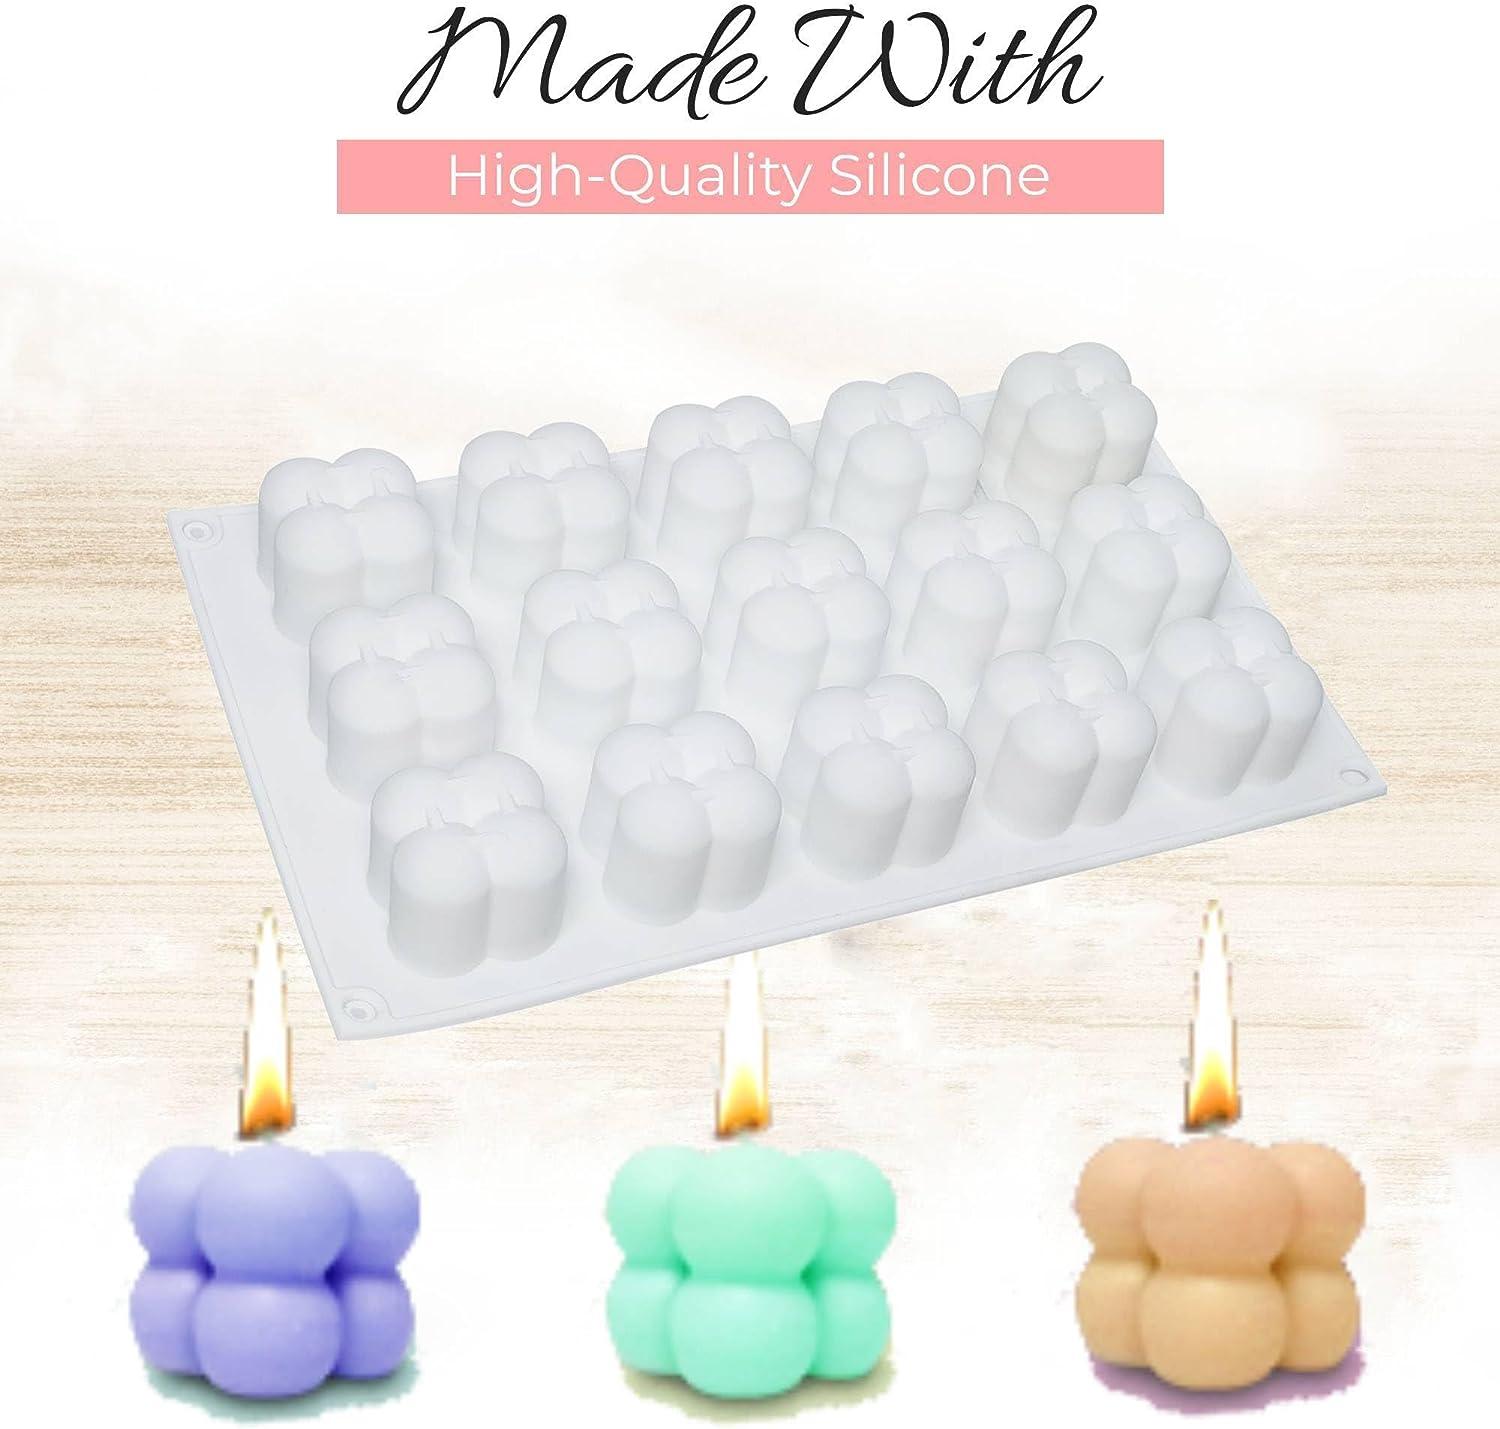 15 Cavity Bubble Candle Mold, Very Cute Silicone Mold with 3 Meter Wick  Roll Included for Candle Making, Soap Mold for Soap Making